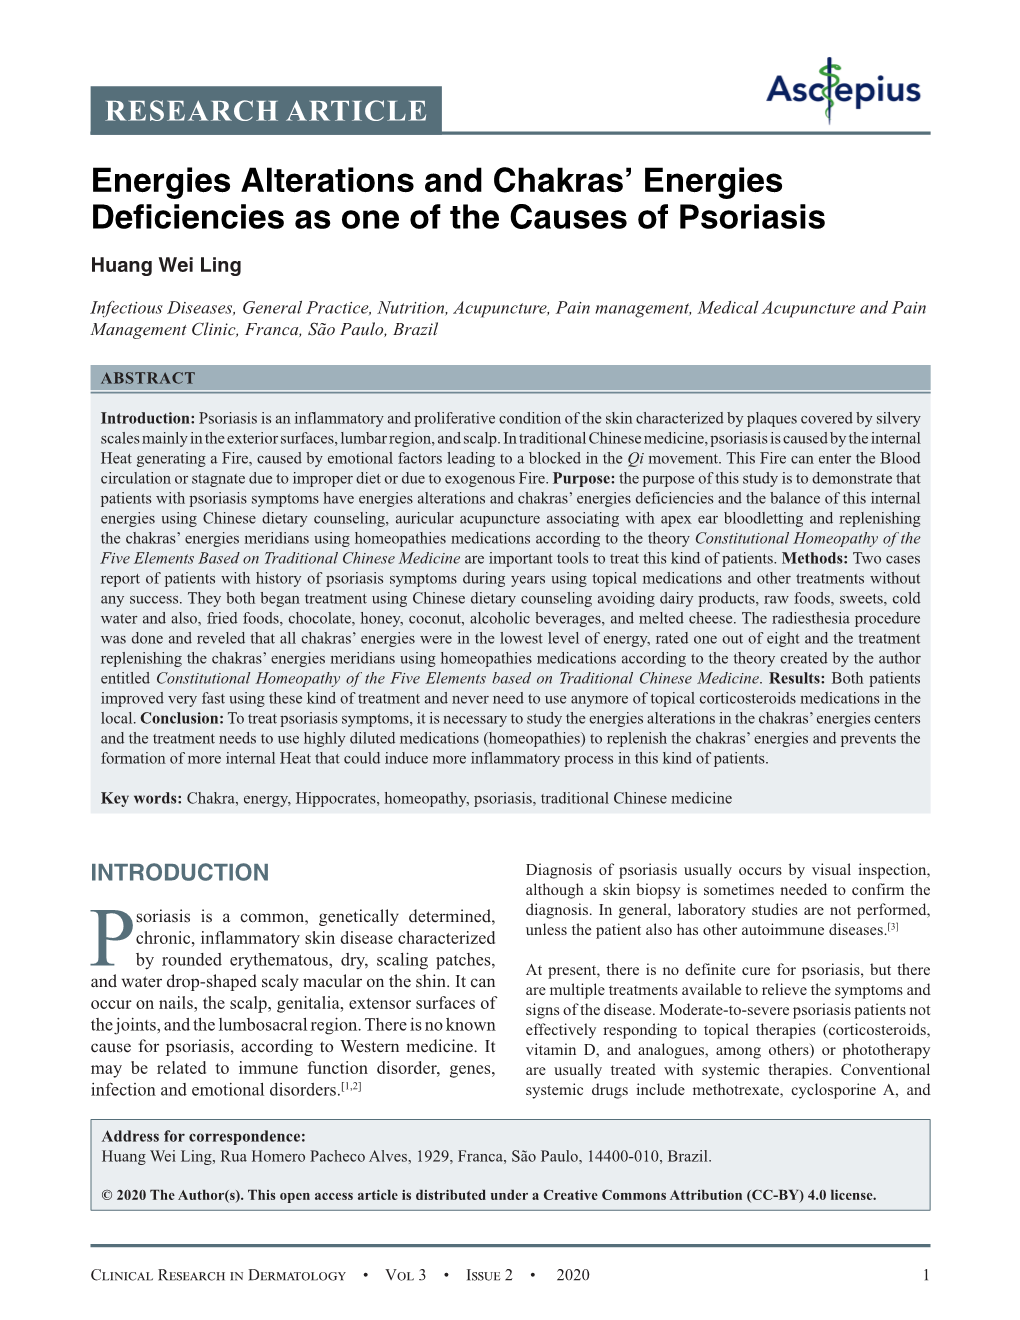 Energies Alterations and Chakras' Energies Deficiencies As One of The